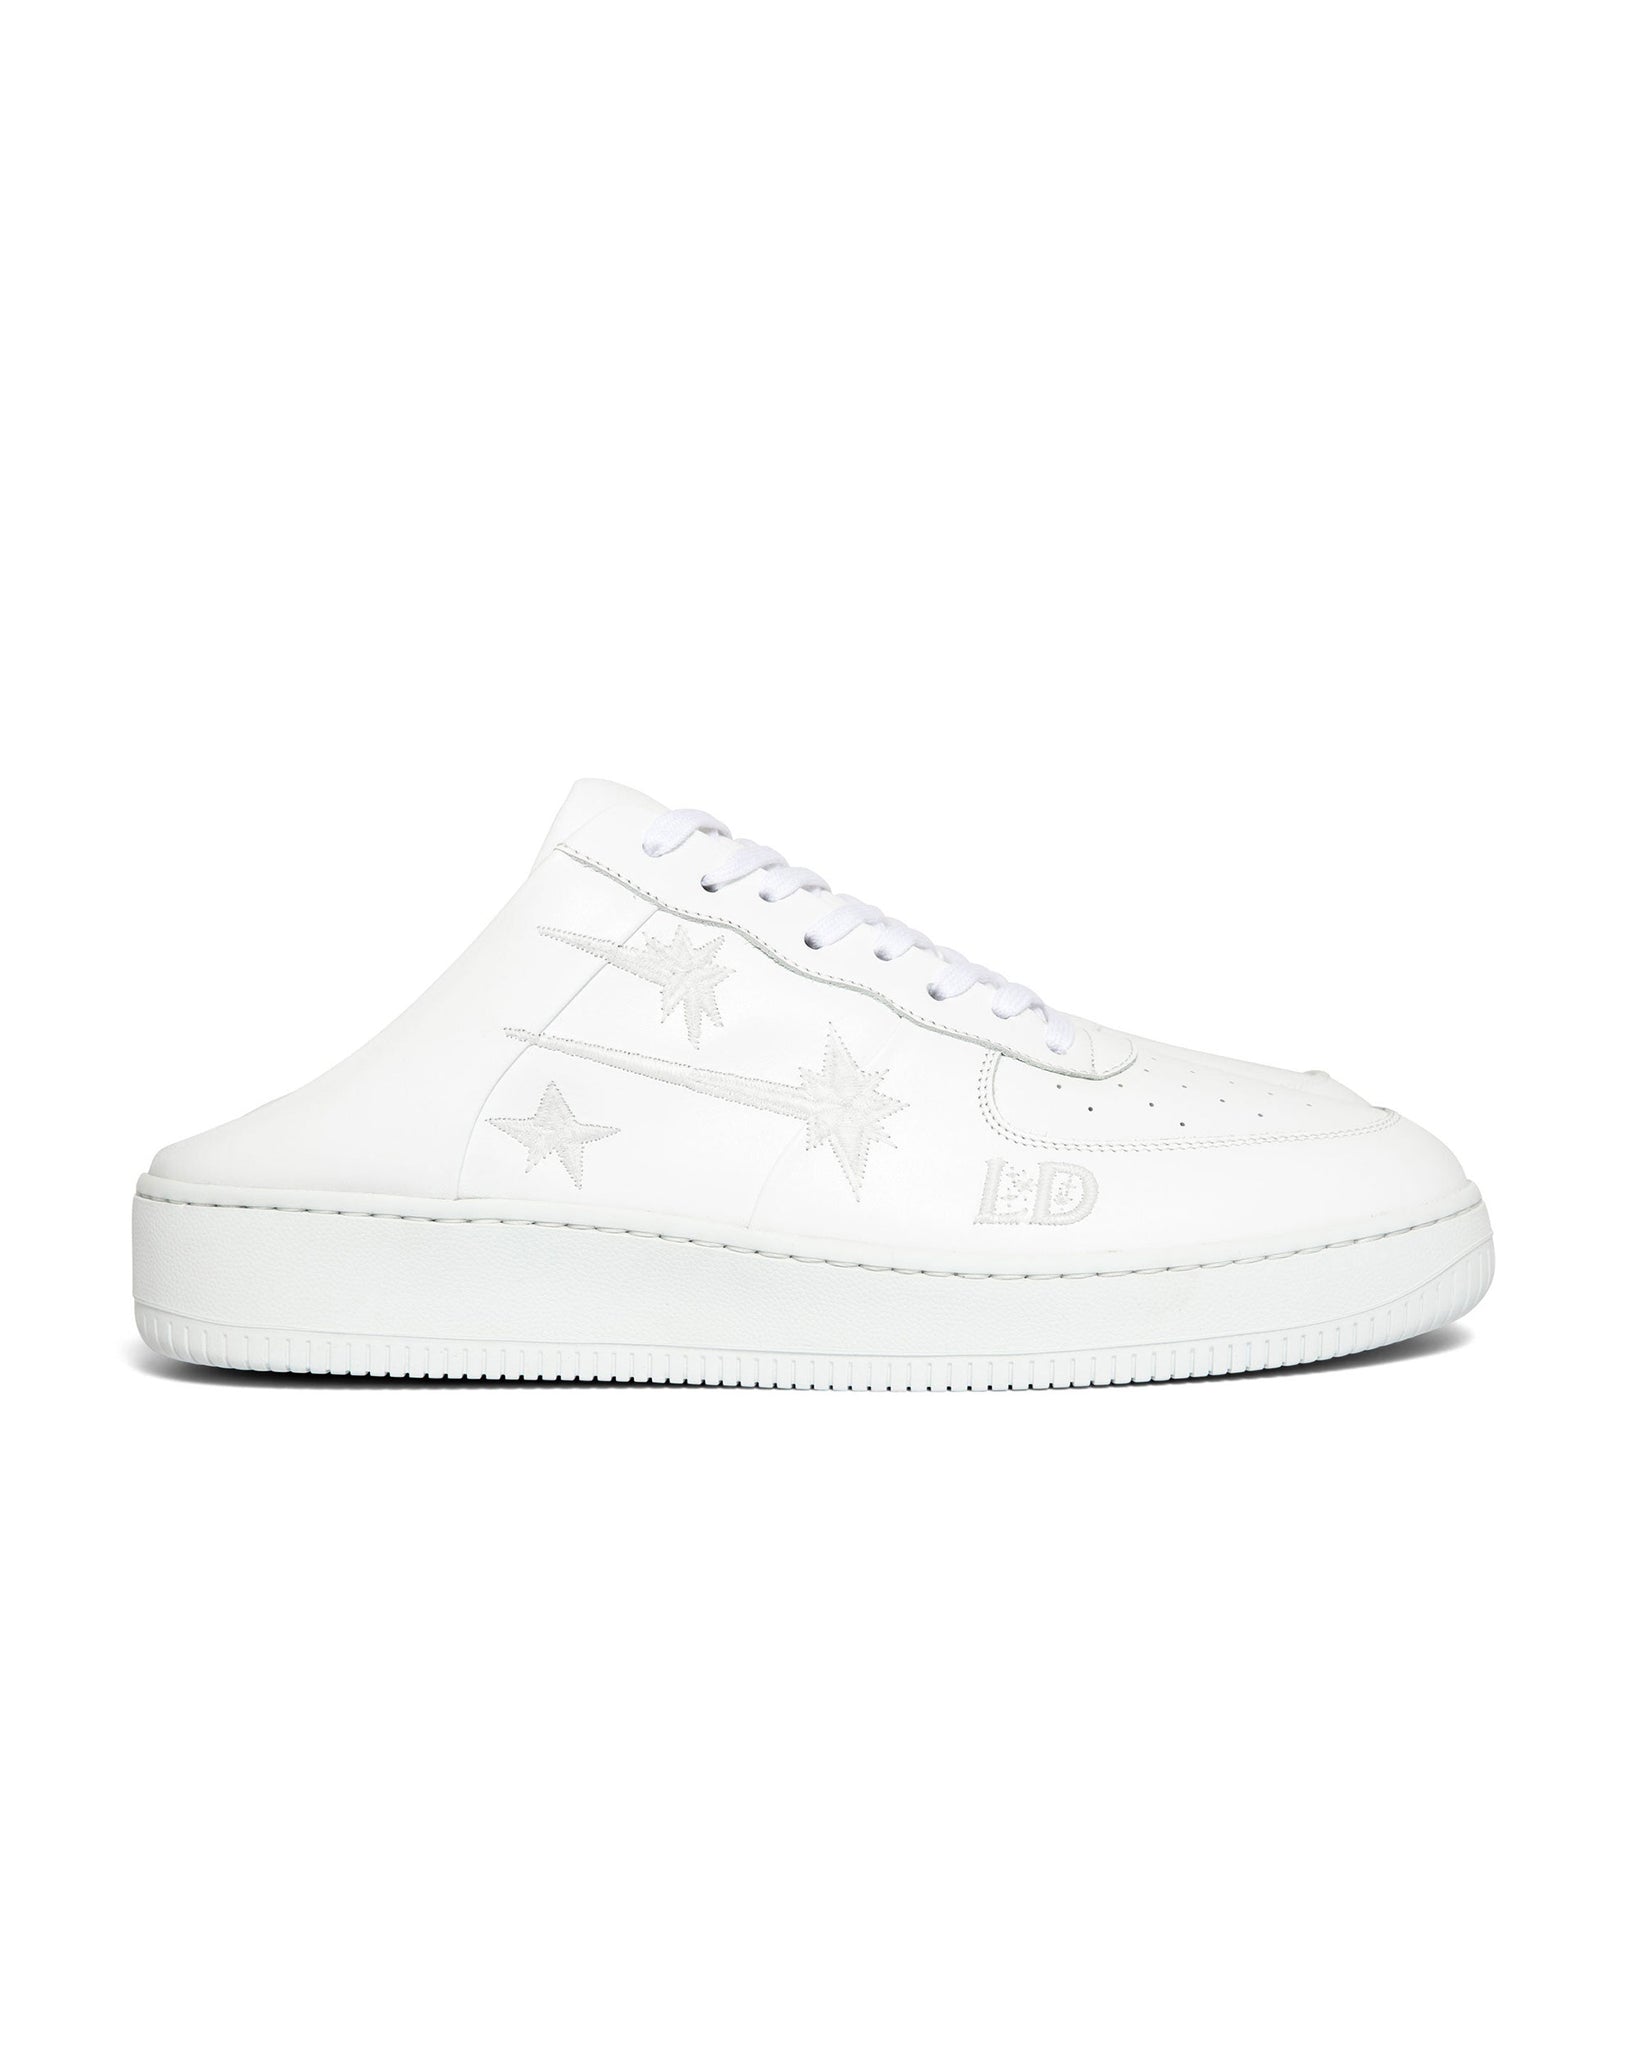 Space Force 1 - White